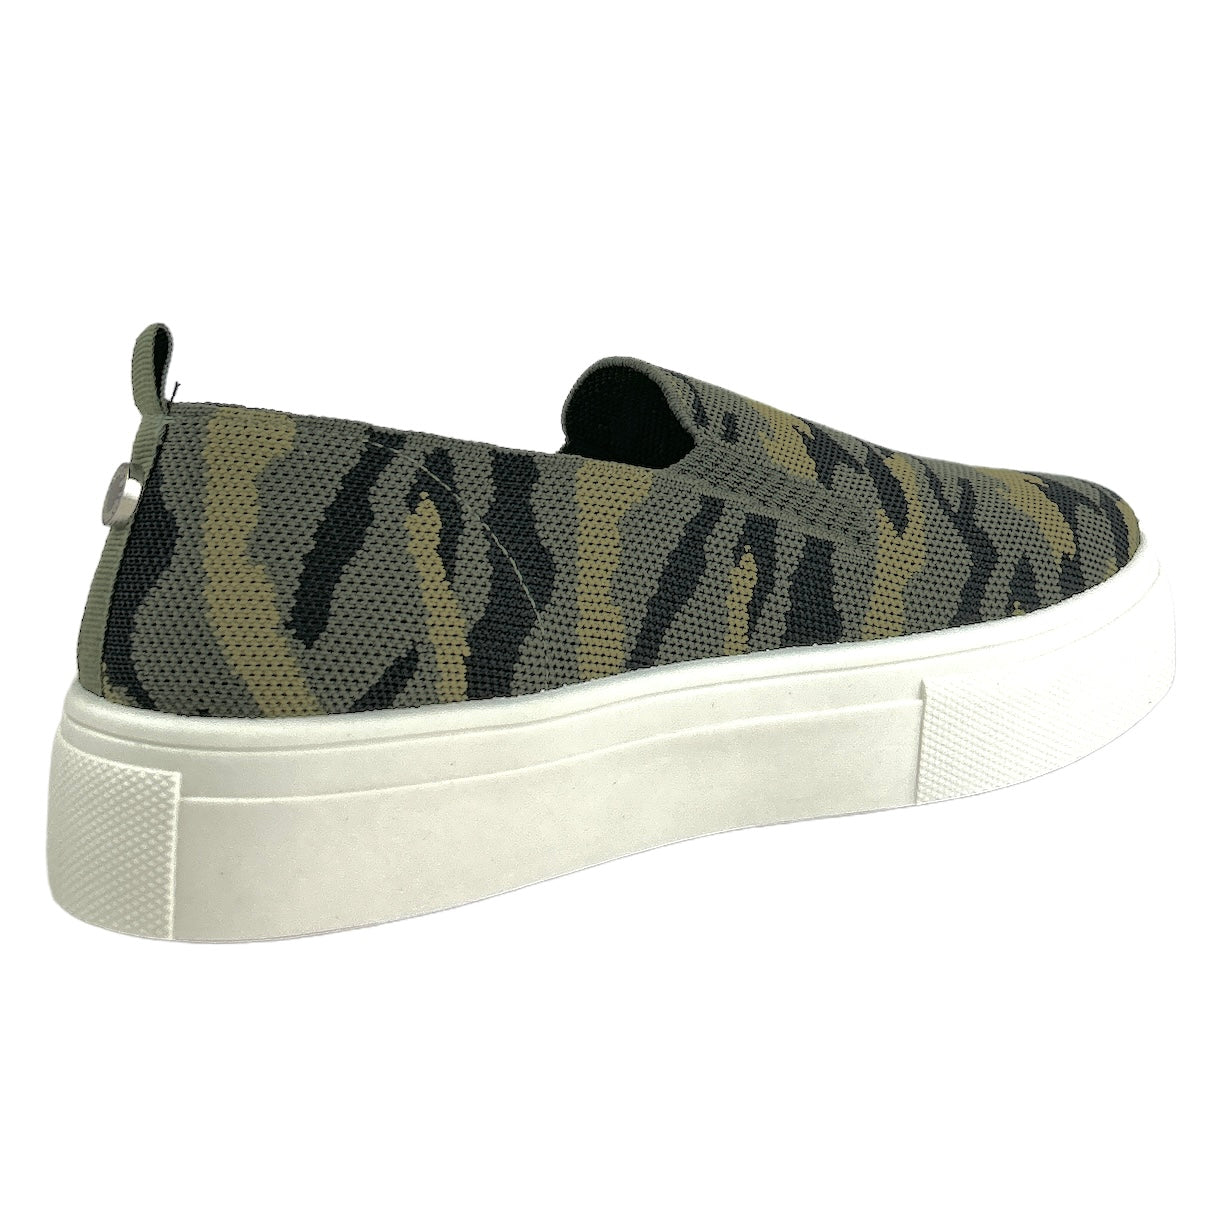 MAYGEE Comfort Camoflage Size 7.5 Platform Slip On Women's Sneakers